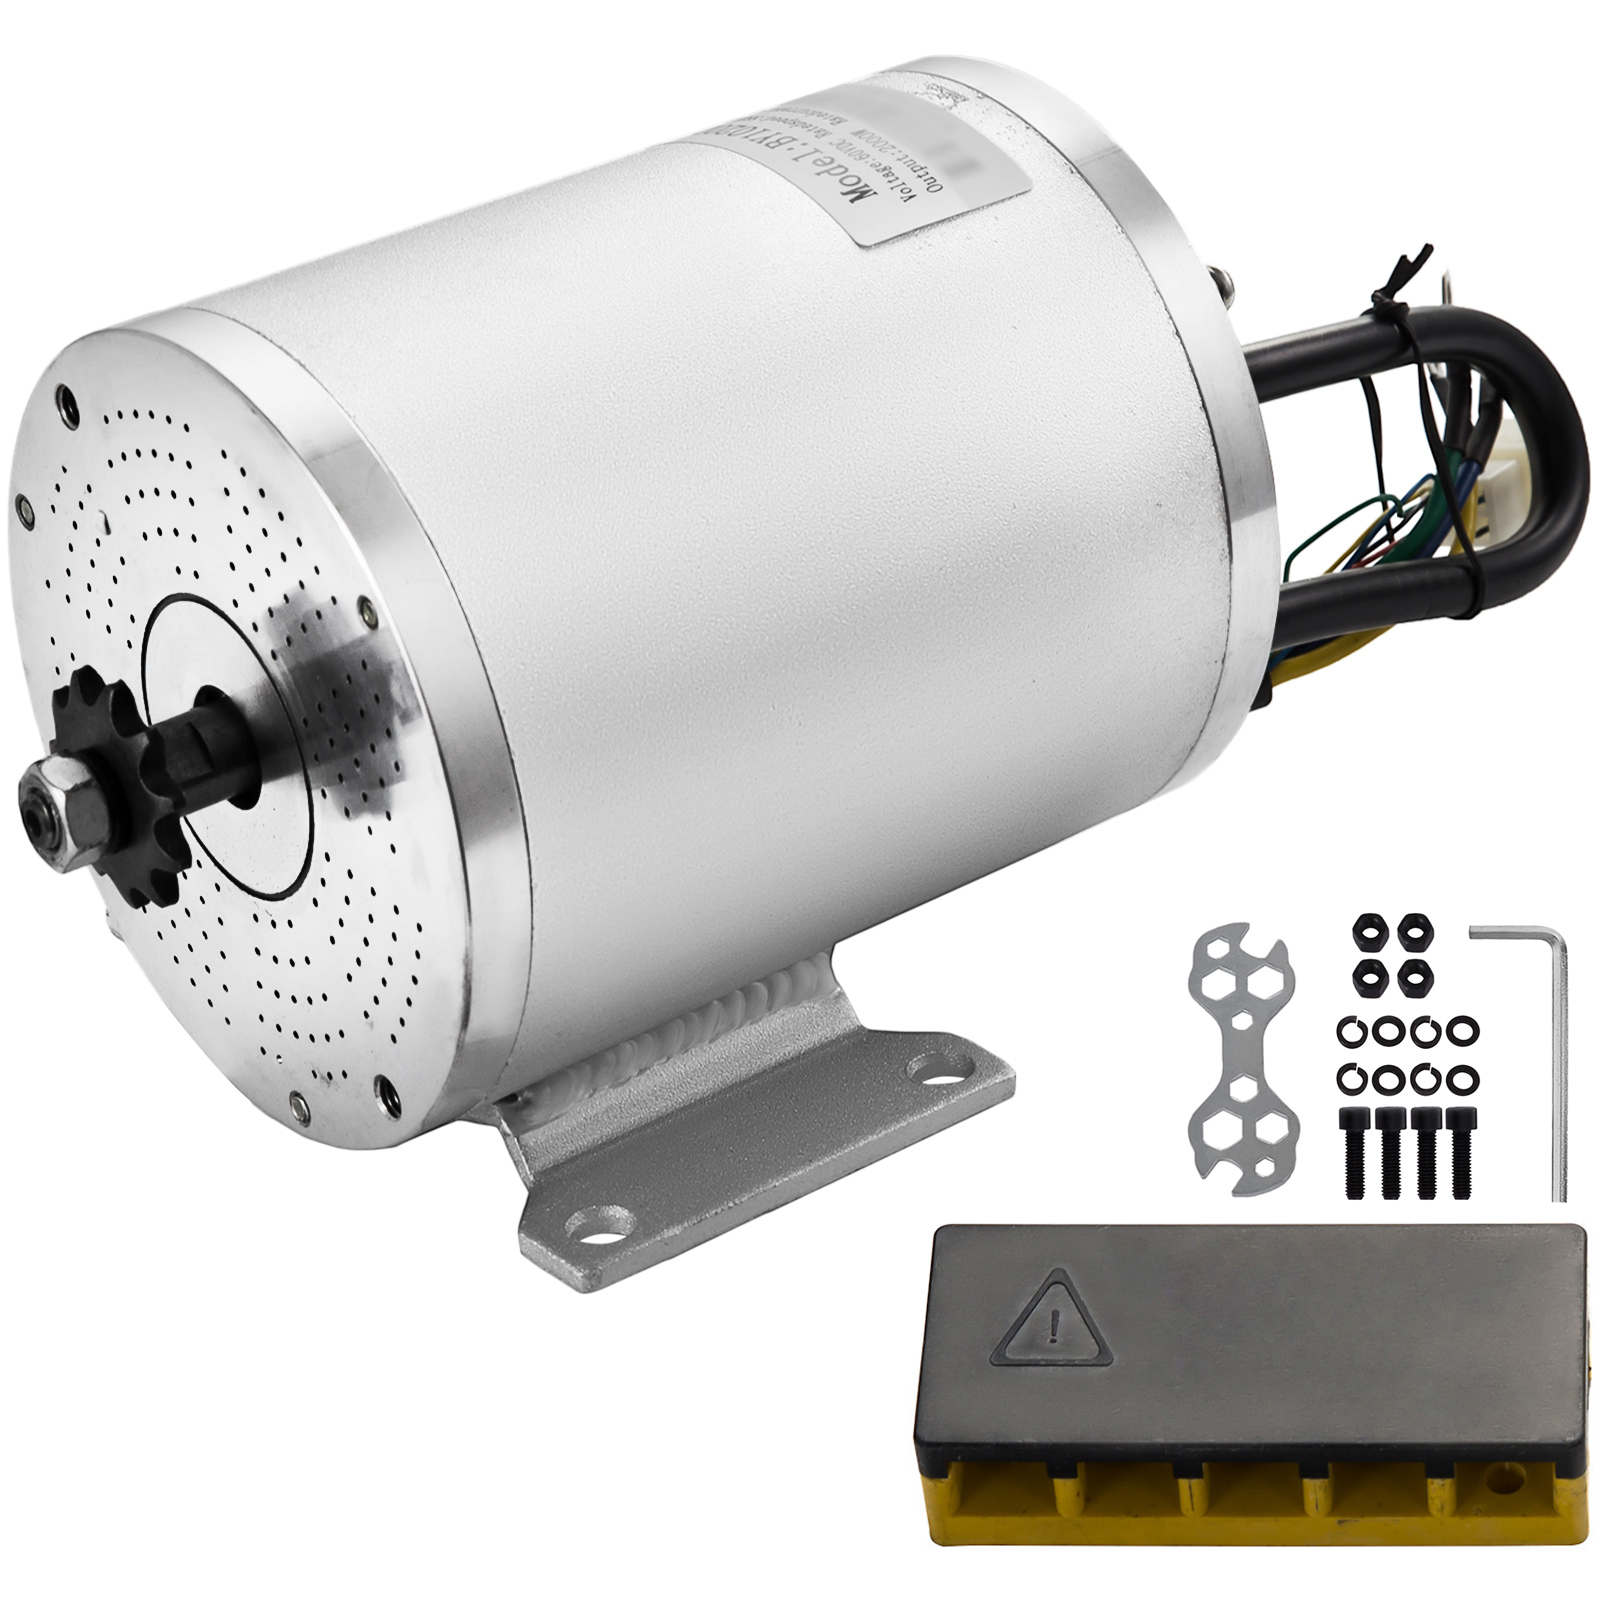 60V DC Brushless Electric Motor 2000W 5600RPM Scooter Reduction E-Scooter Razor 